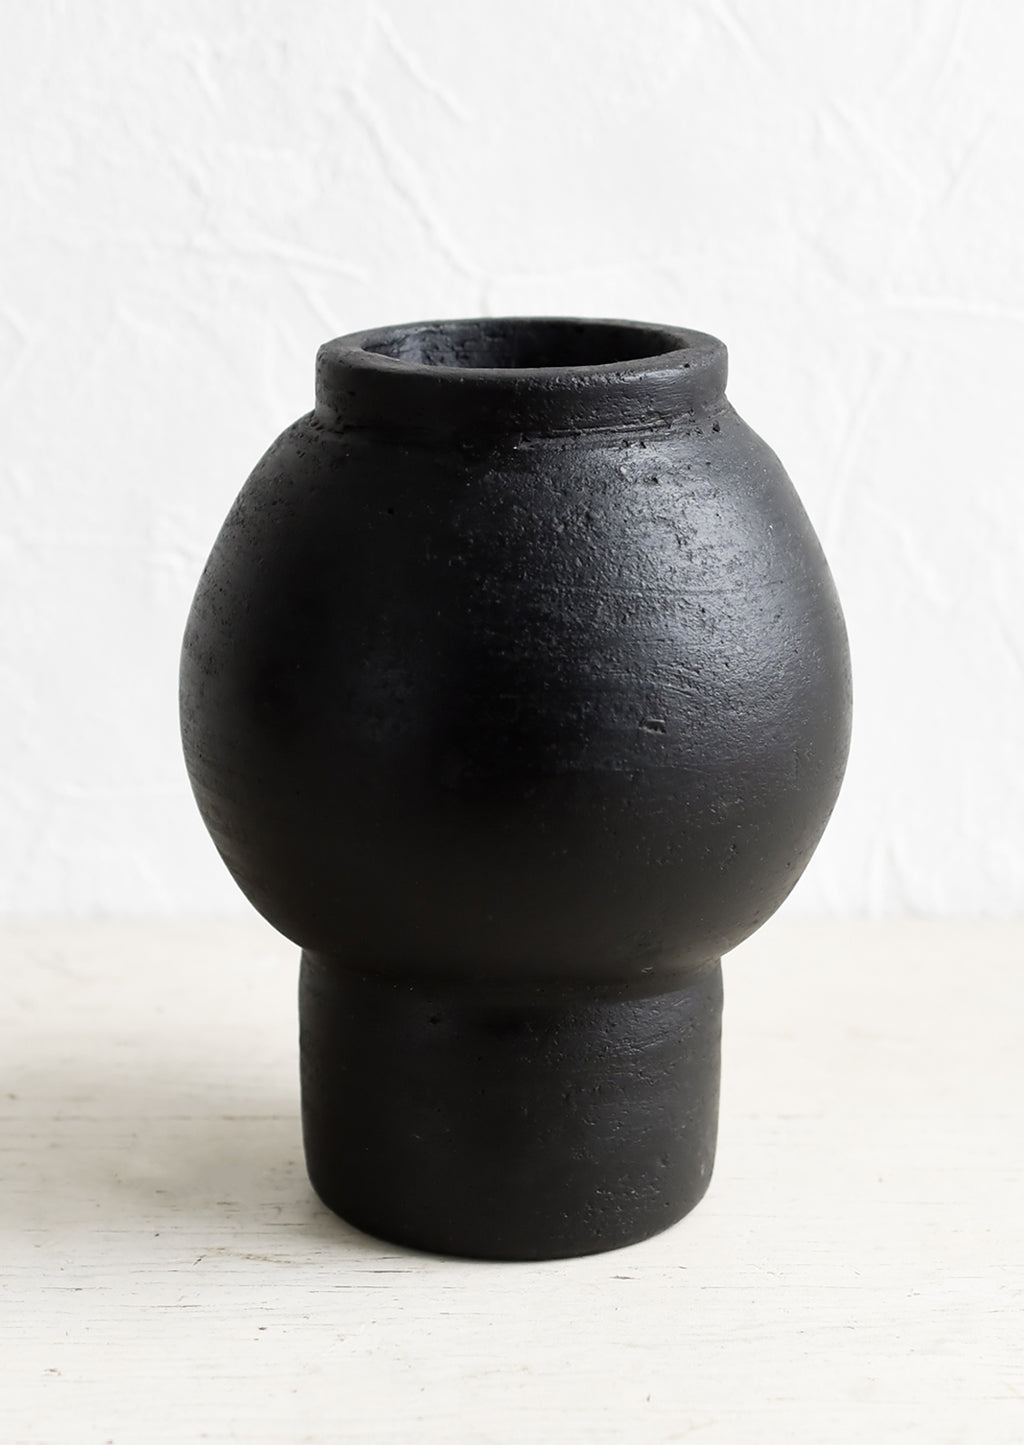 2: A vase in black terracotta clay with round shaped center and footed base.